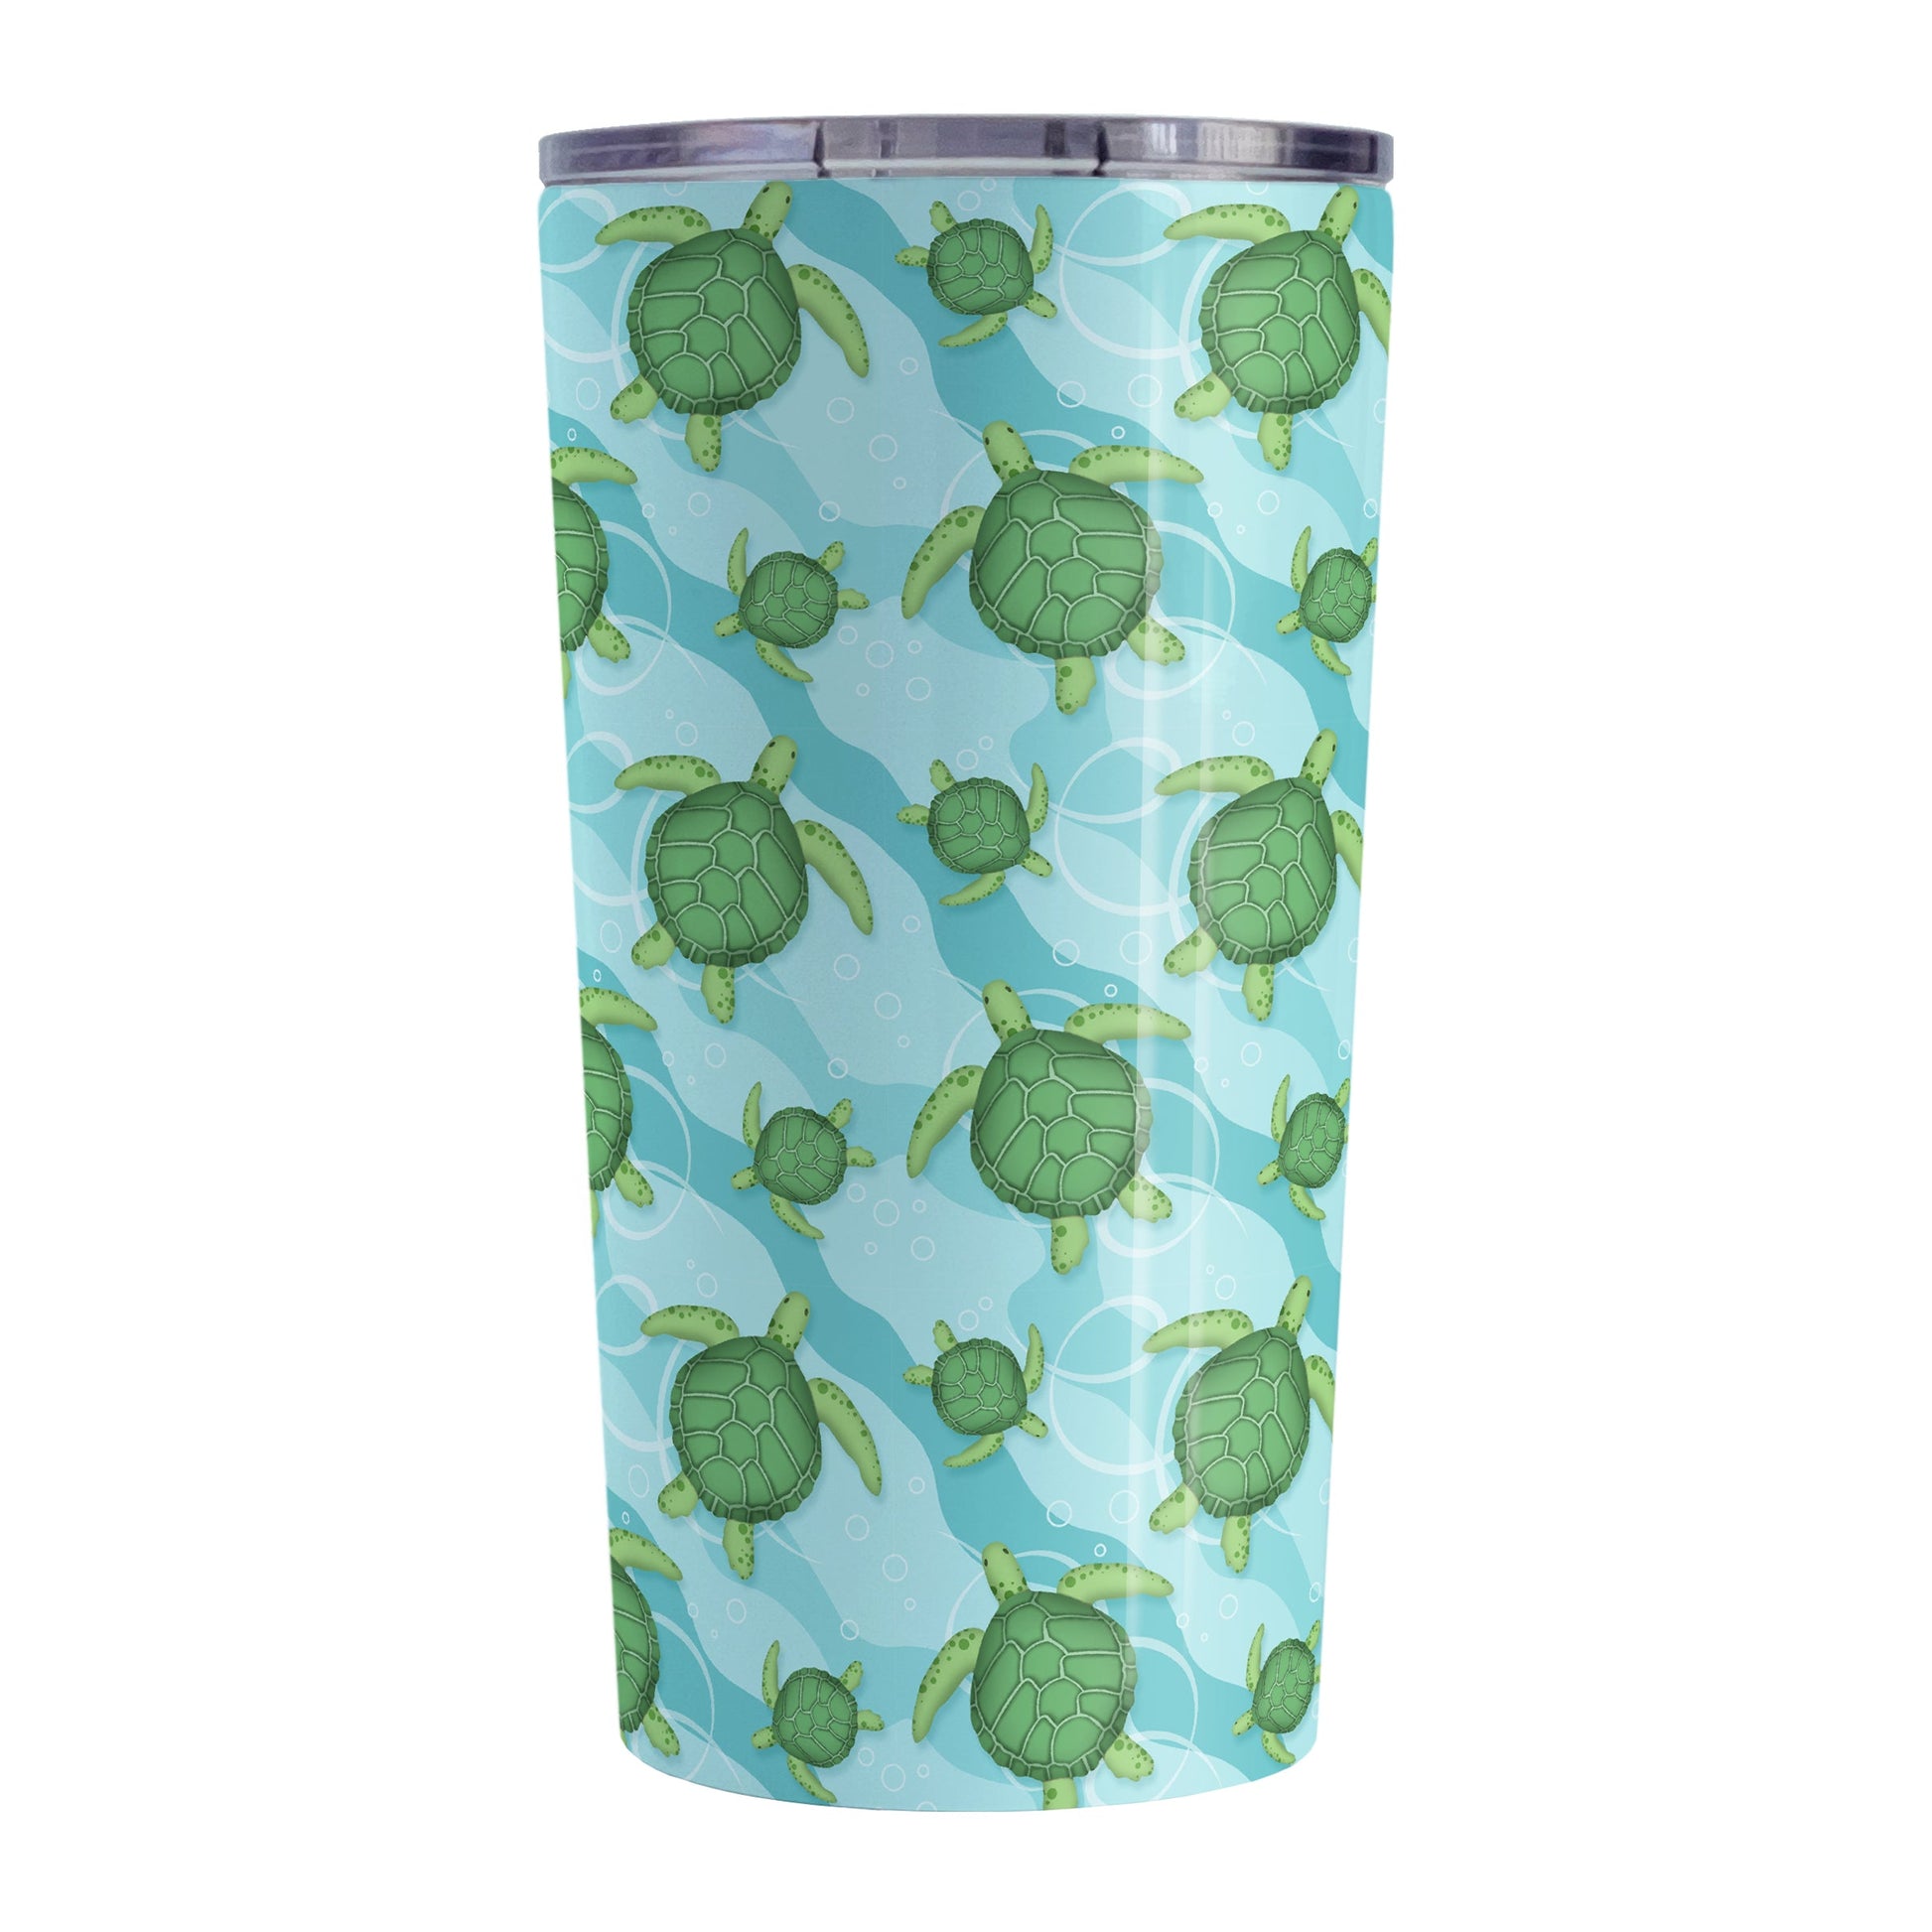 Aquatic Sea Turtle Pattern Tumbler Cup (20oz, stainless steel insulated) at Amy's Coffee Mugs. A sea turtle tumbler cup with an aquatic pattern of green sea turtles, swimming over a wavy underwater pattern design in blue and turquoise, that wraps around the cup.